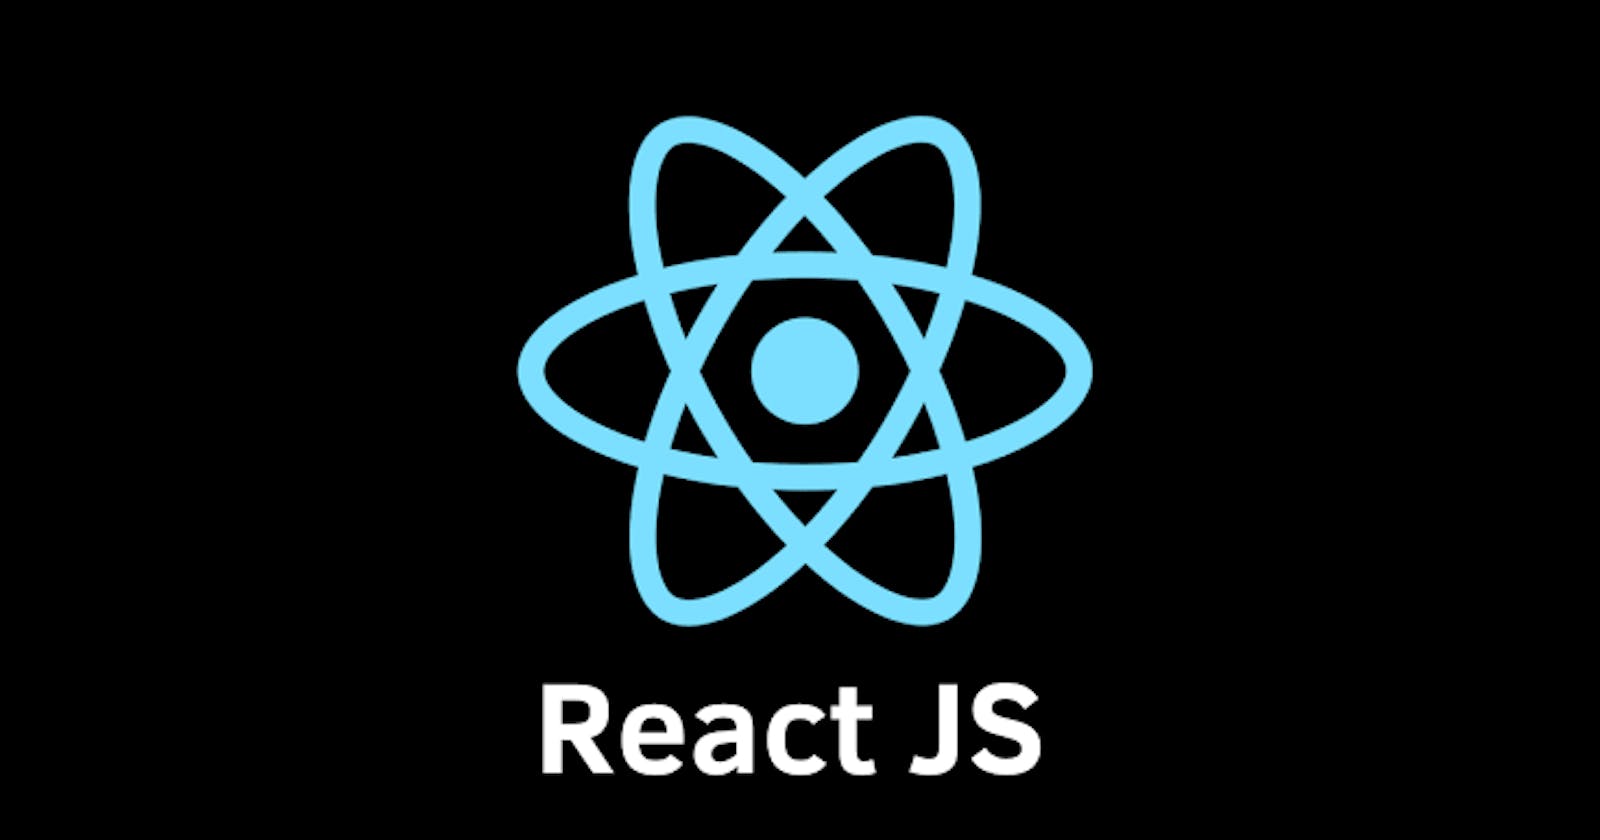 Basic Introduction To React.